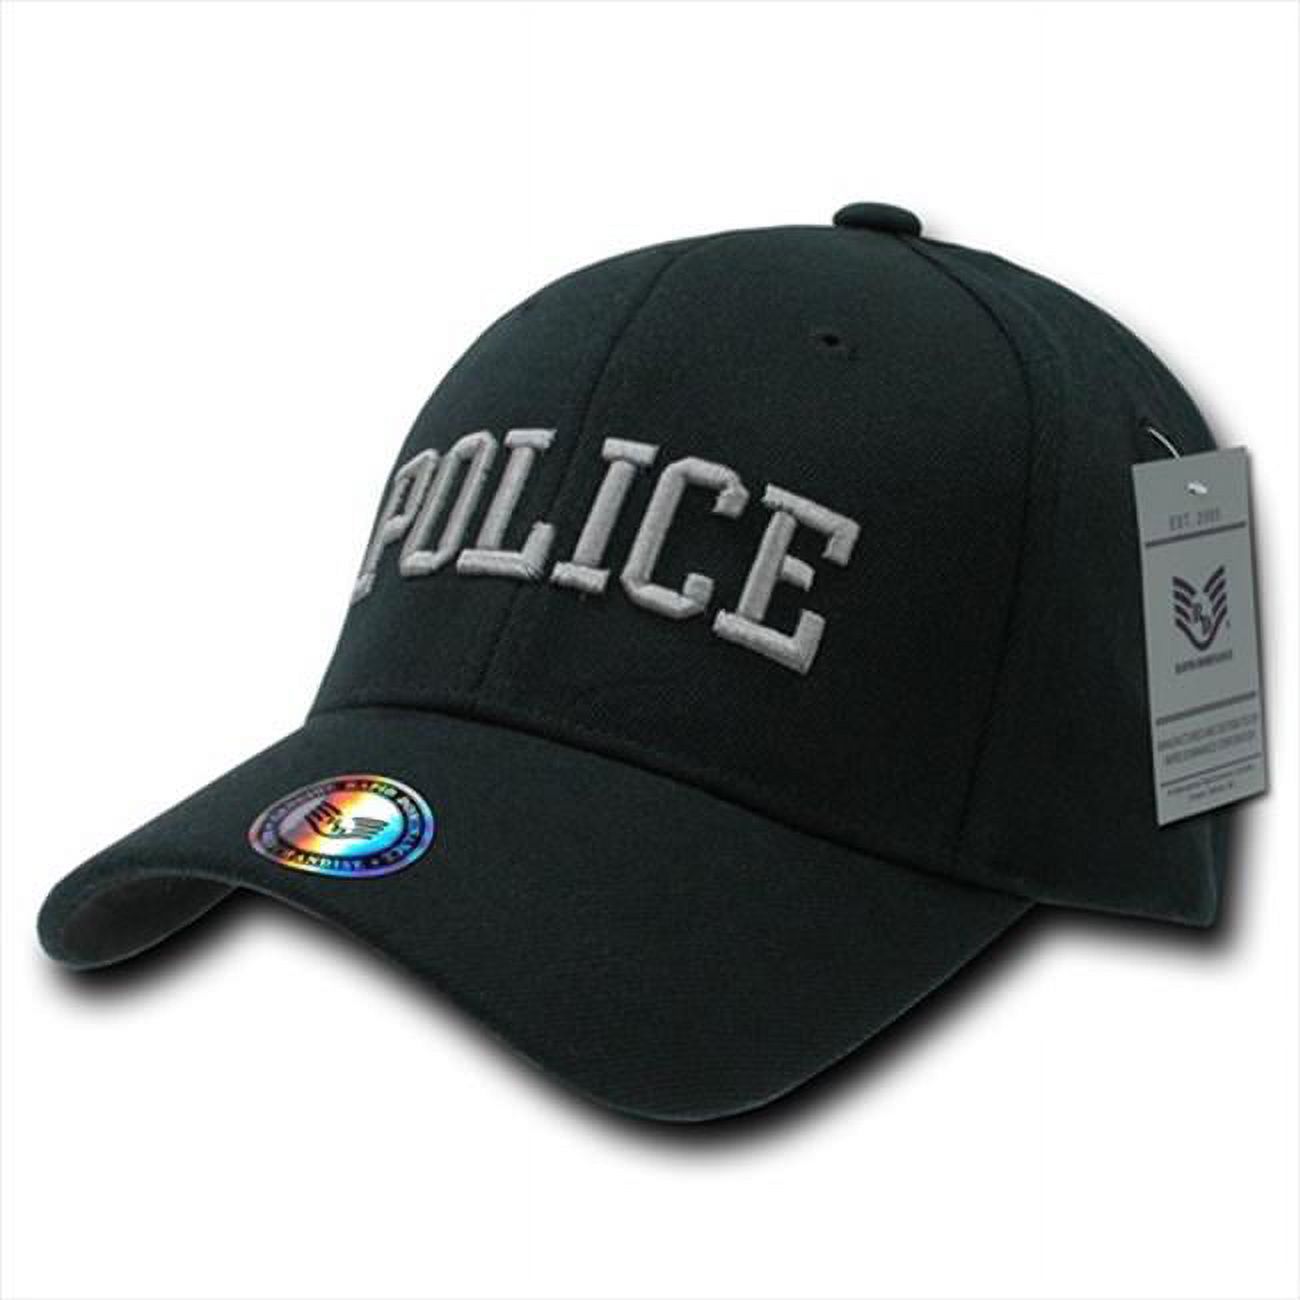 Rapid Dominance Police Text FitAll Flex Mens Cap [Black - S/M] - image 1 of 2